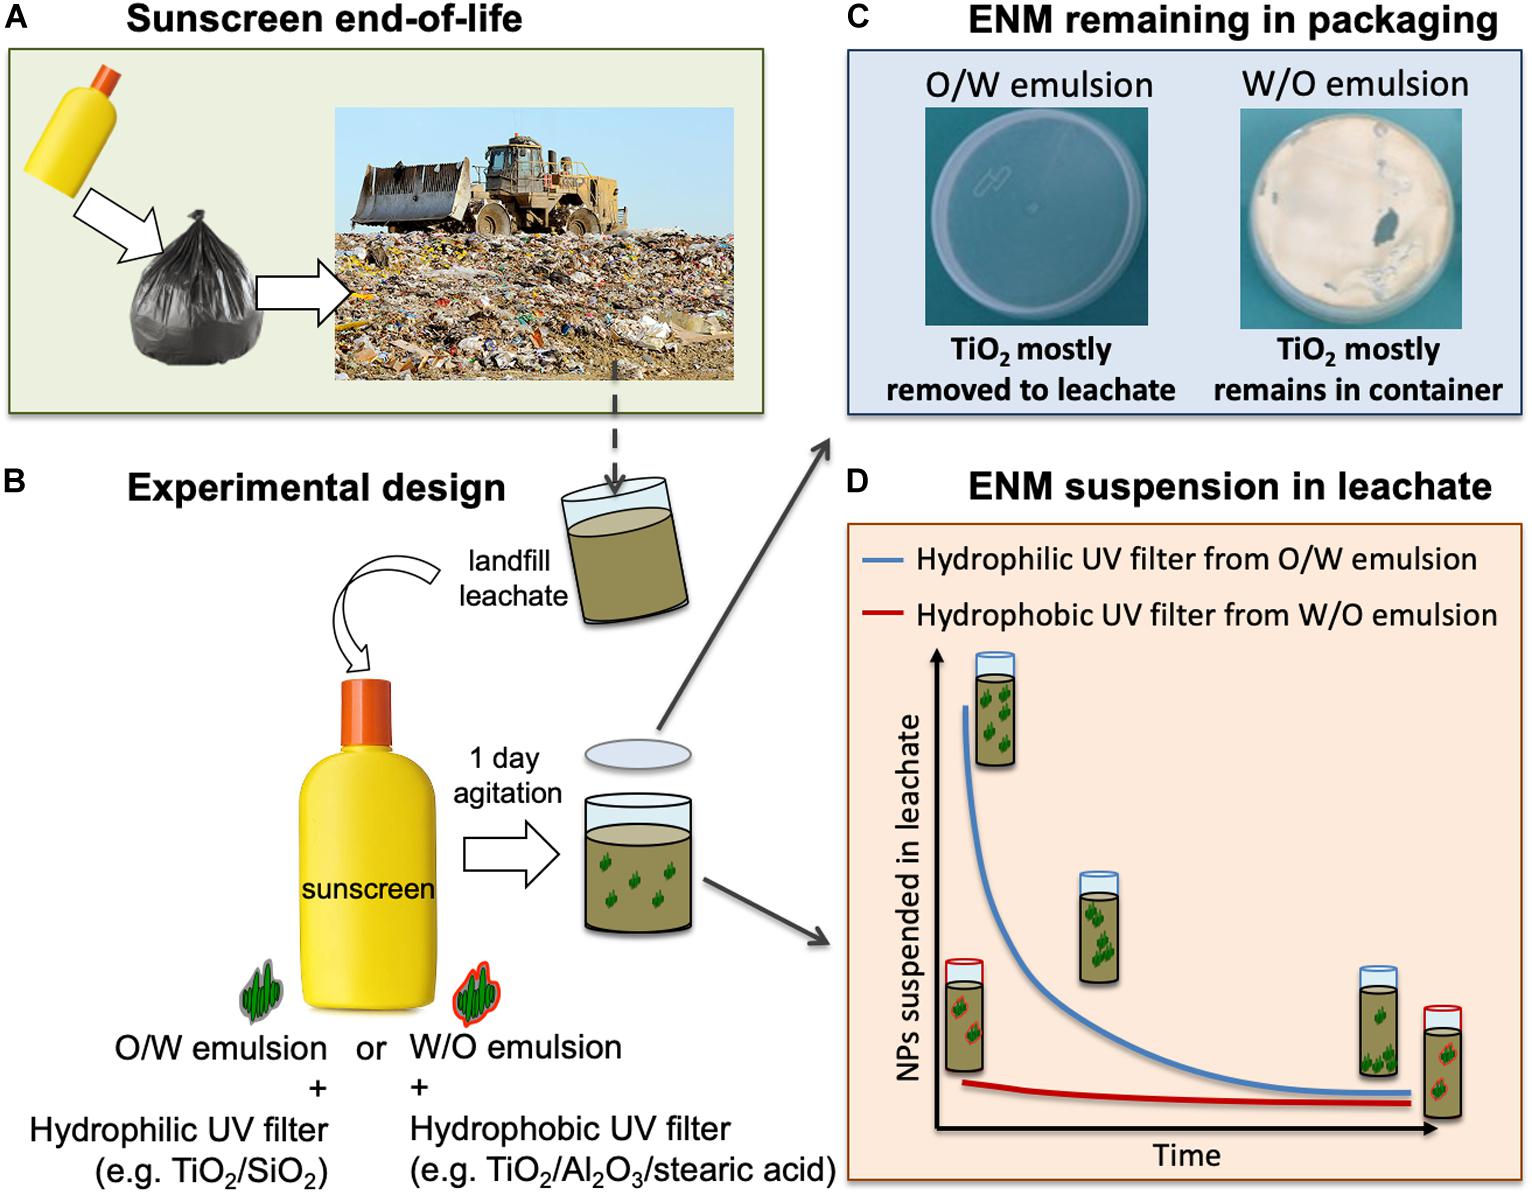 Frontiers Assessing Sunscreen Lifecycle To Minimize Environmental Risk Posed By Nanoparticulate Uv Filters A Review For Safer By Design Products Environmental Science